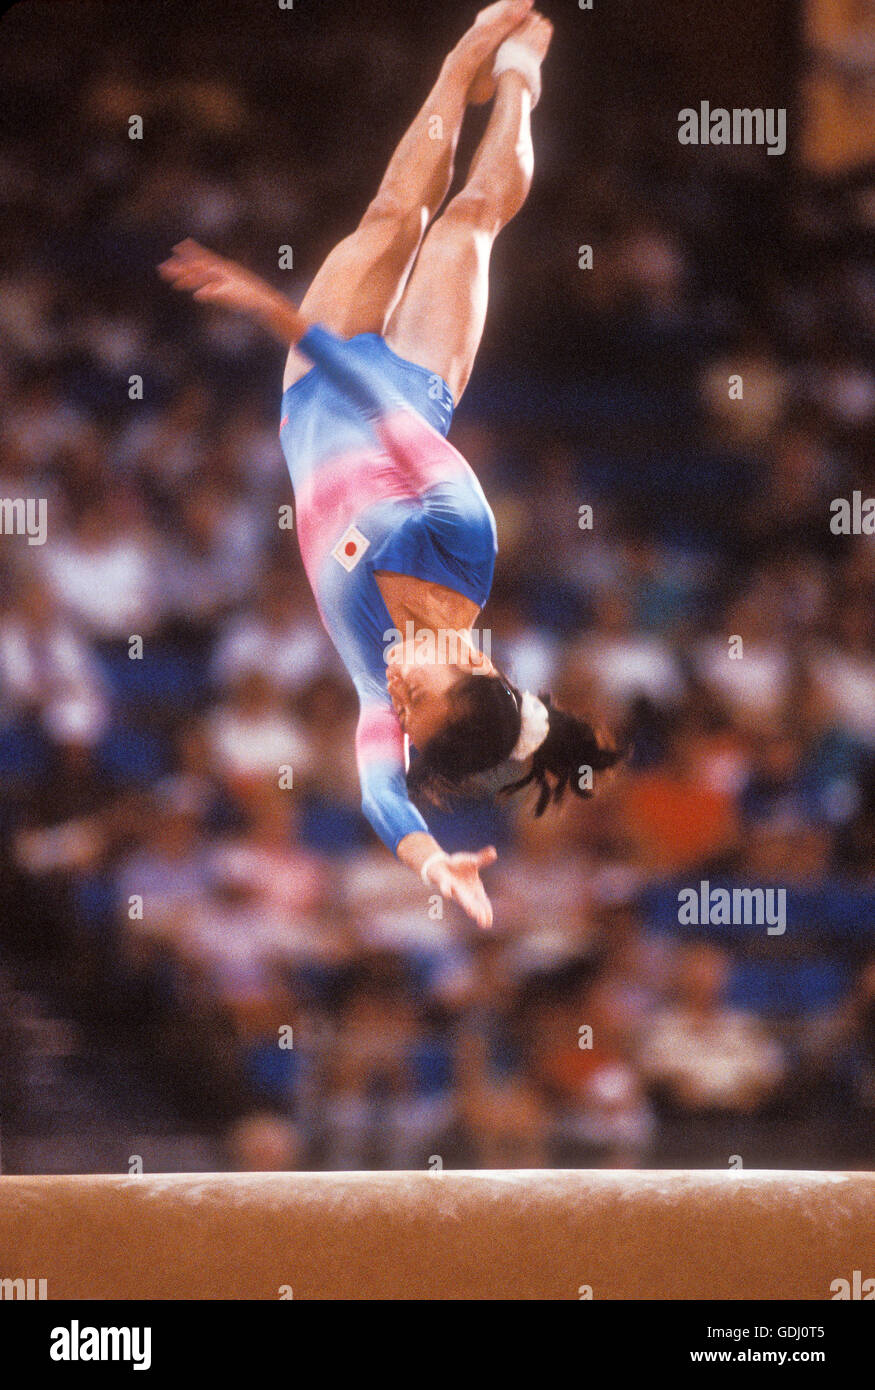 Japanese gymnast performs on women's vault during competition at 1984 Olympic Games in Los Angeles. Stock Photo